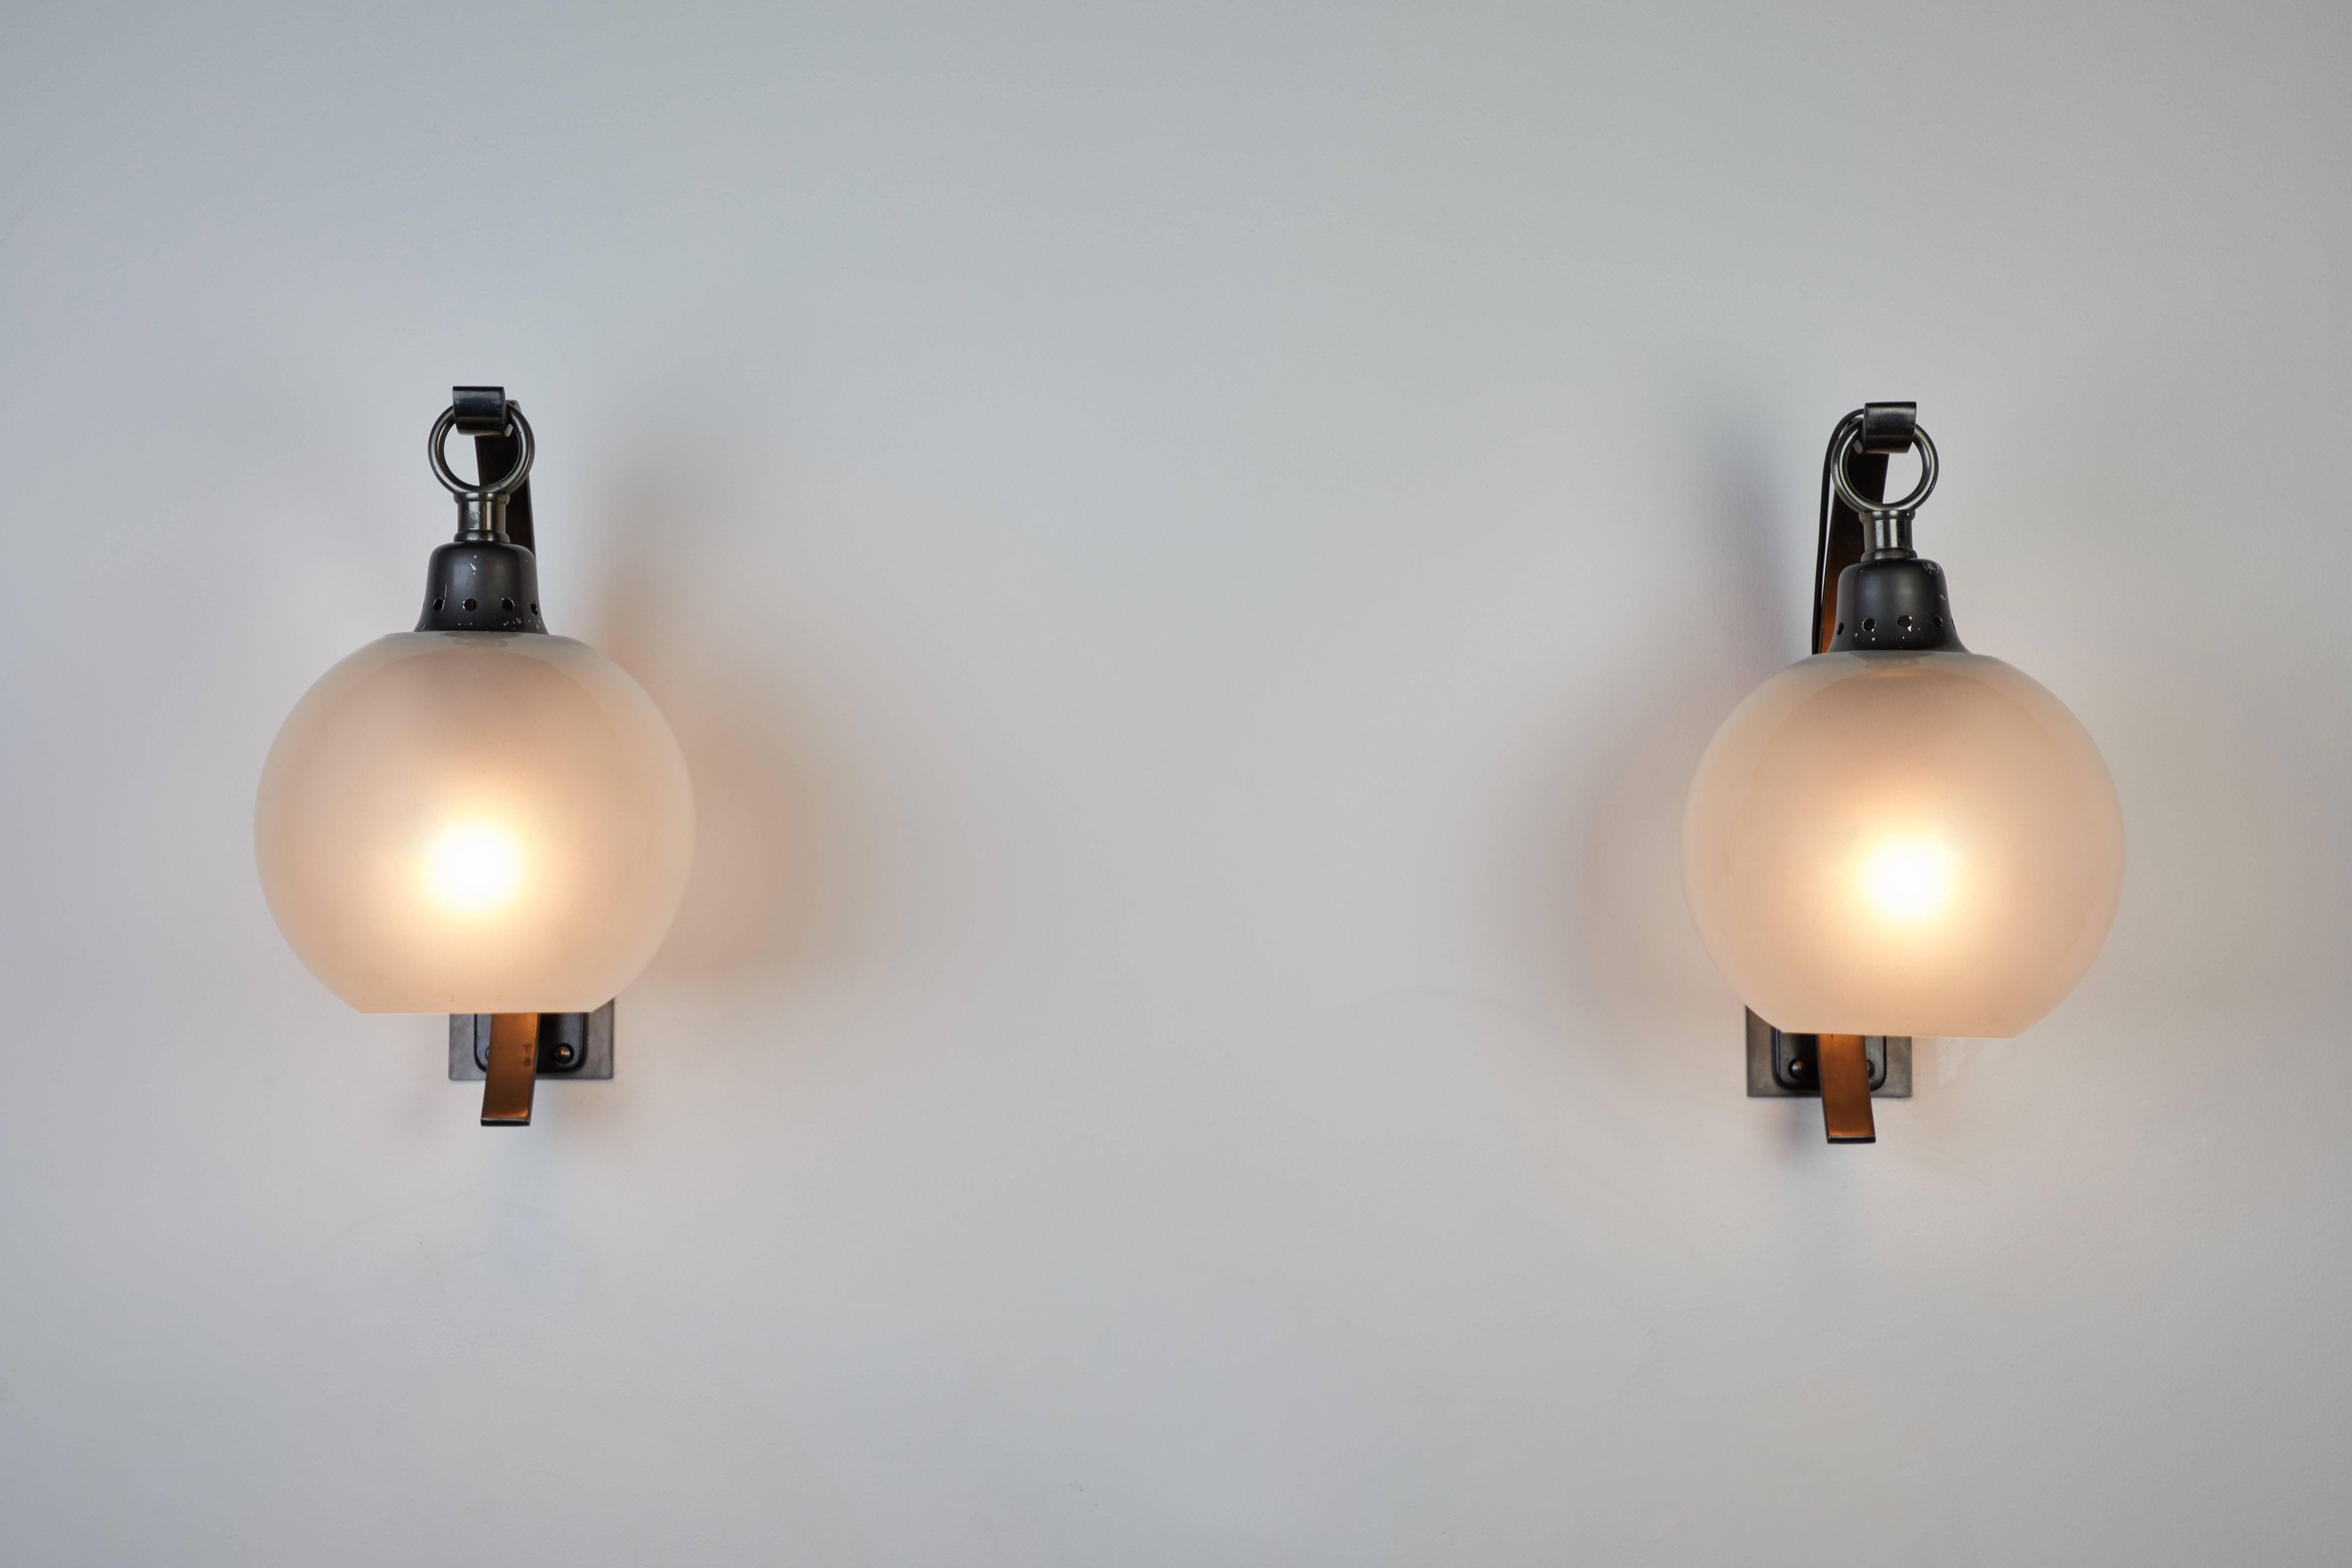 Pair of original Boccia Wall lights designed by Luigi Caccia Dominioni for Azucena in Italy, circa 1980s. Curved arm in steel, socket element in aluminium, hook in burnished iron. Globe in frosted satin glass. Wired for US junction boxes. Each globe